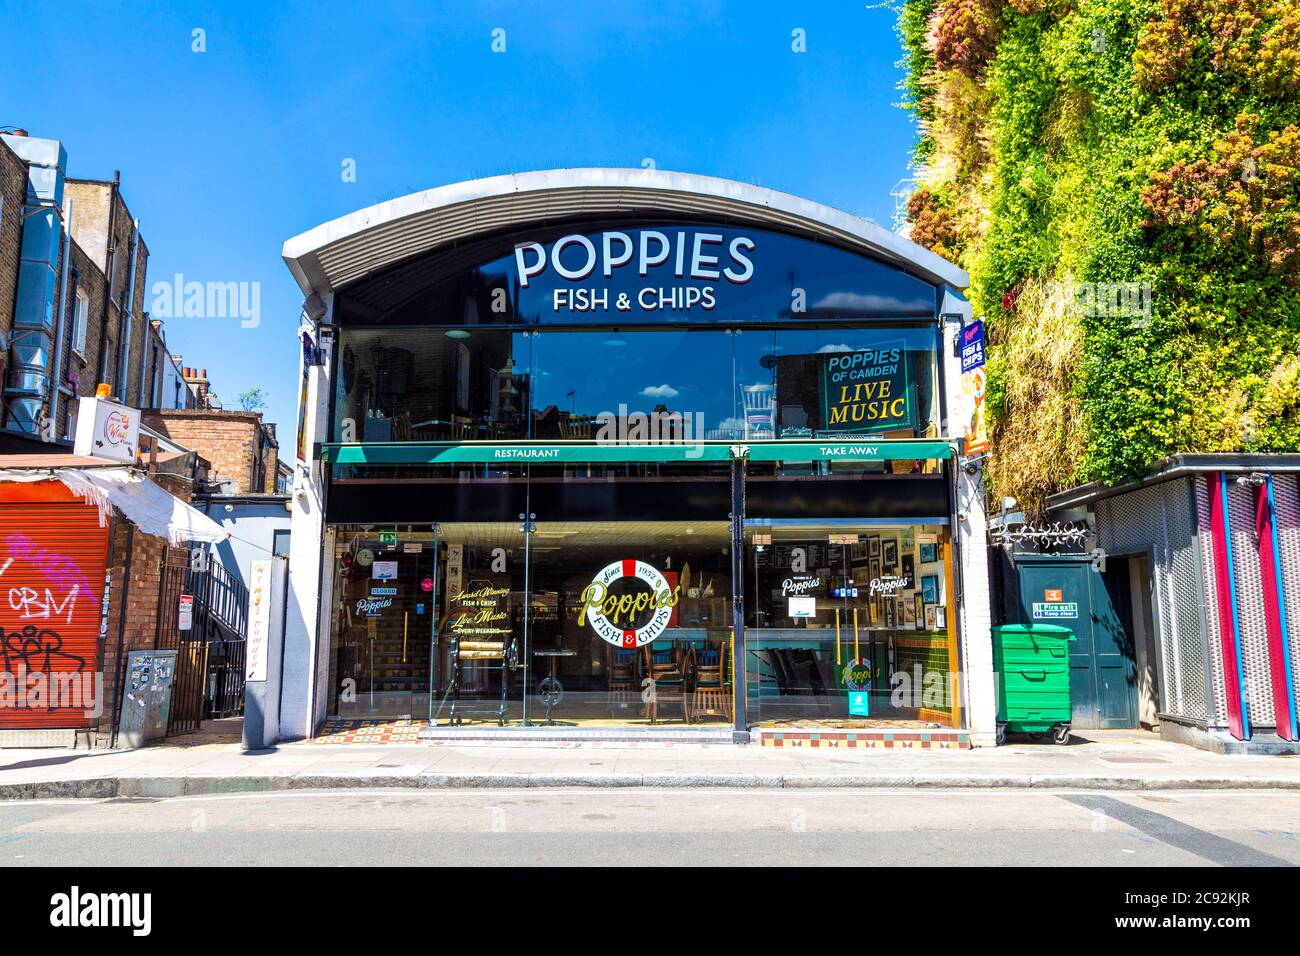 Exterior of Poppies Fish & Chips in Camden, London, UK Stock Photo - Alamy